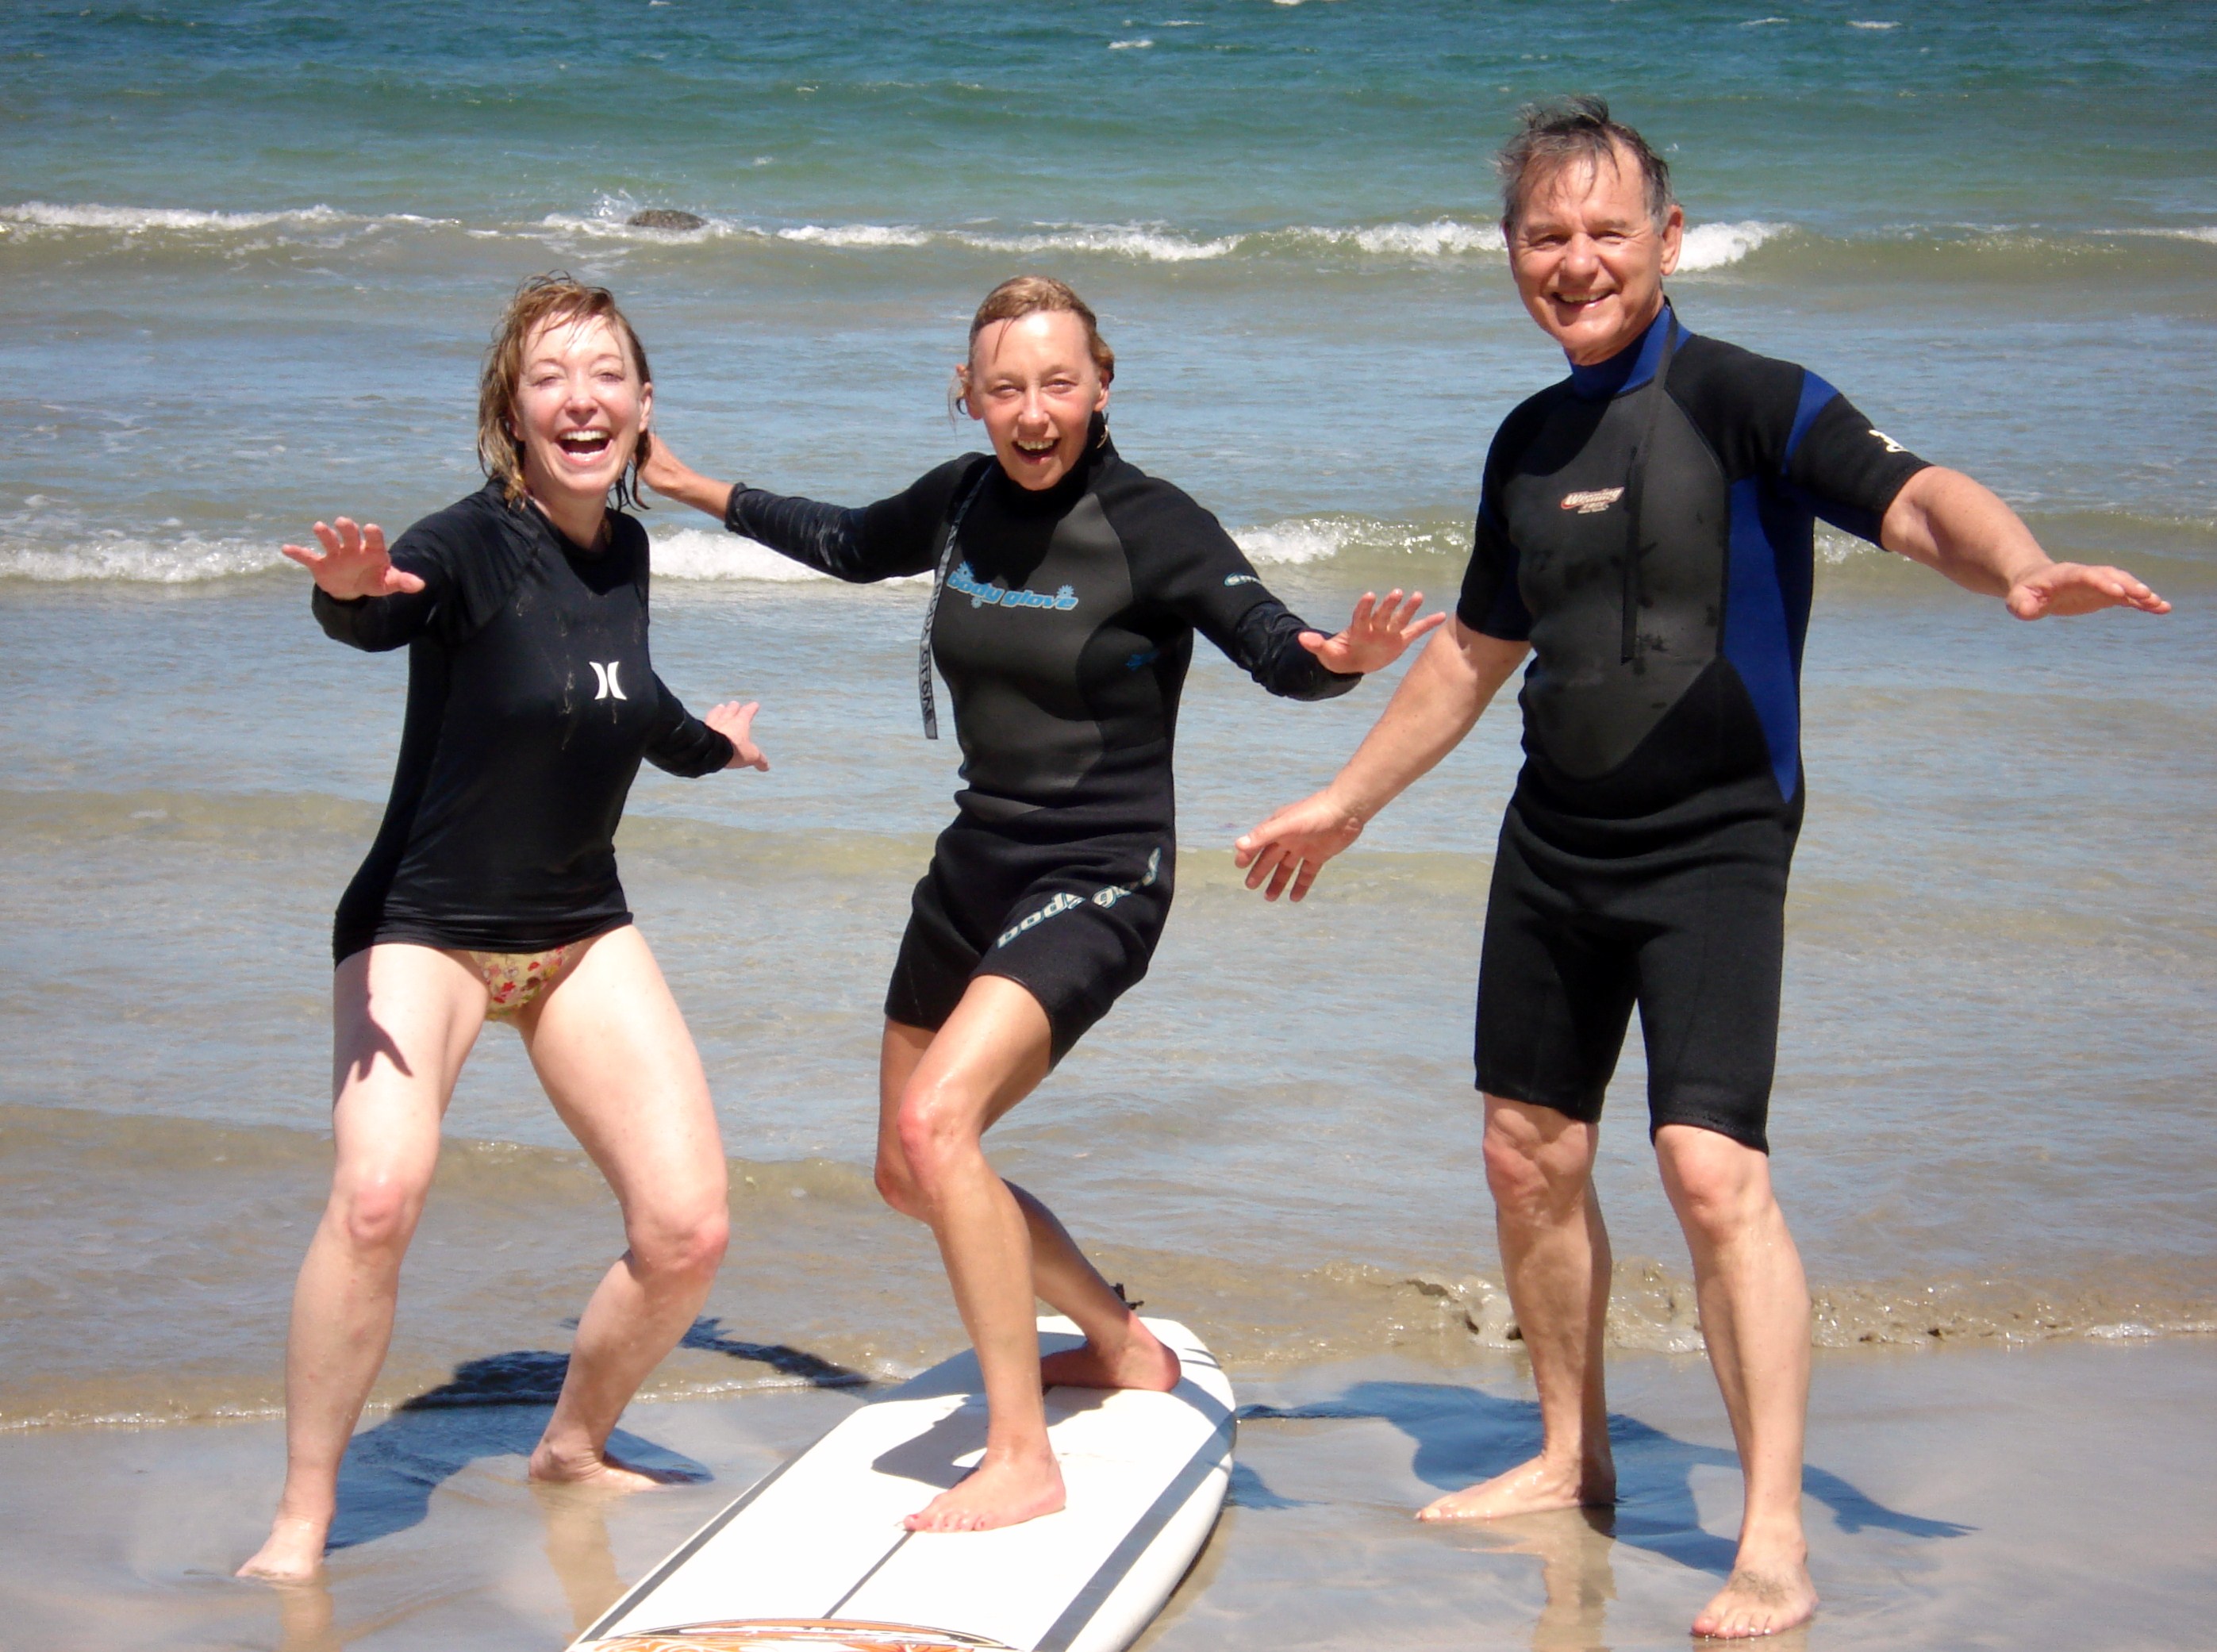 Costa Rica surfing healthy active chiropractors having fun living a vibrant life